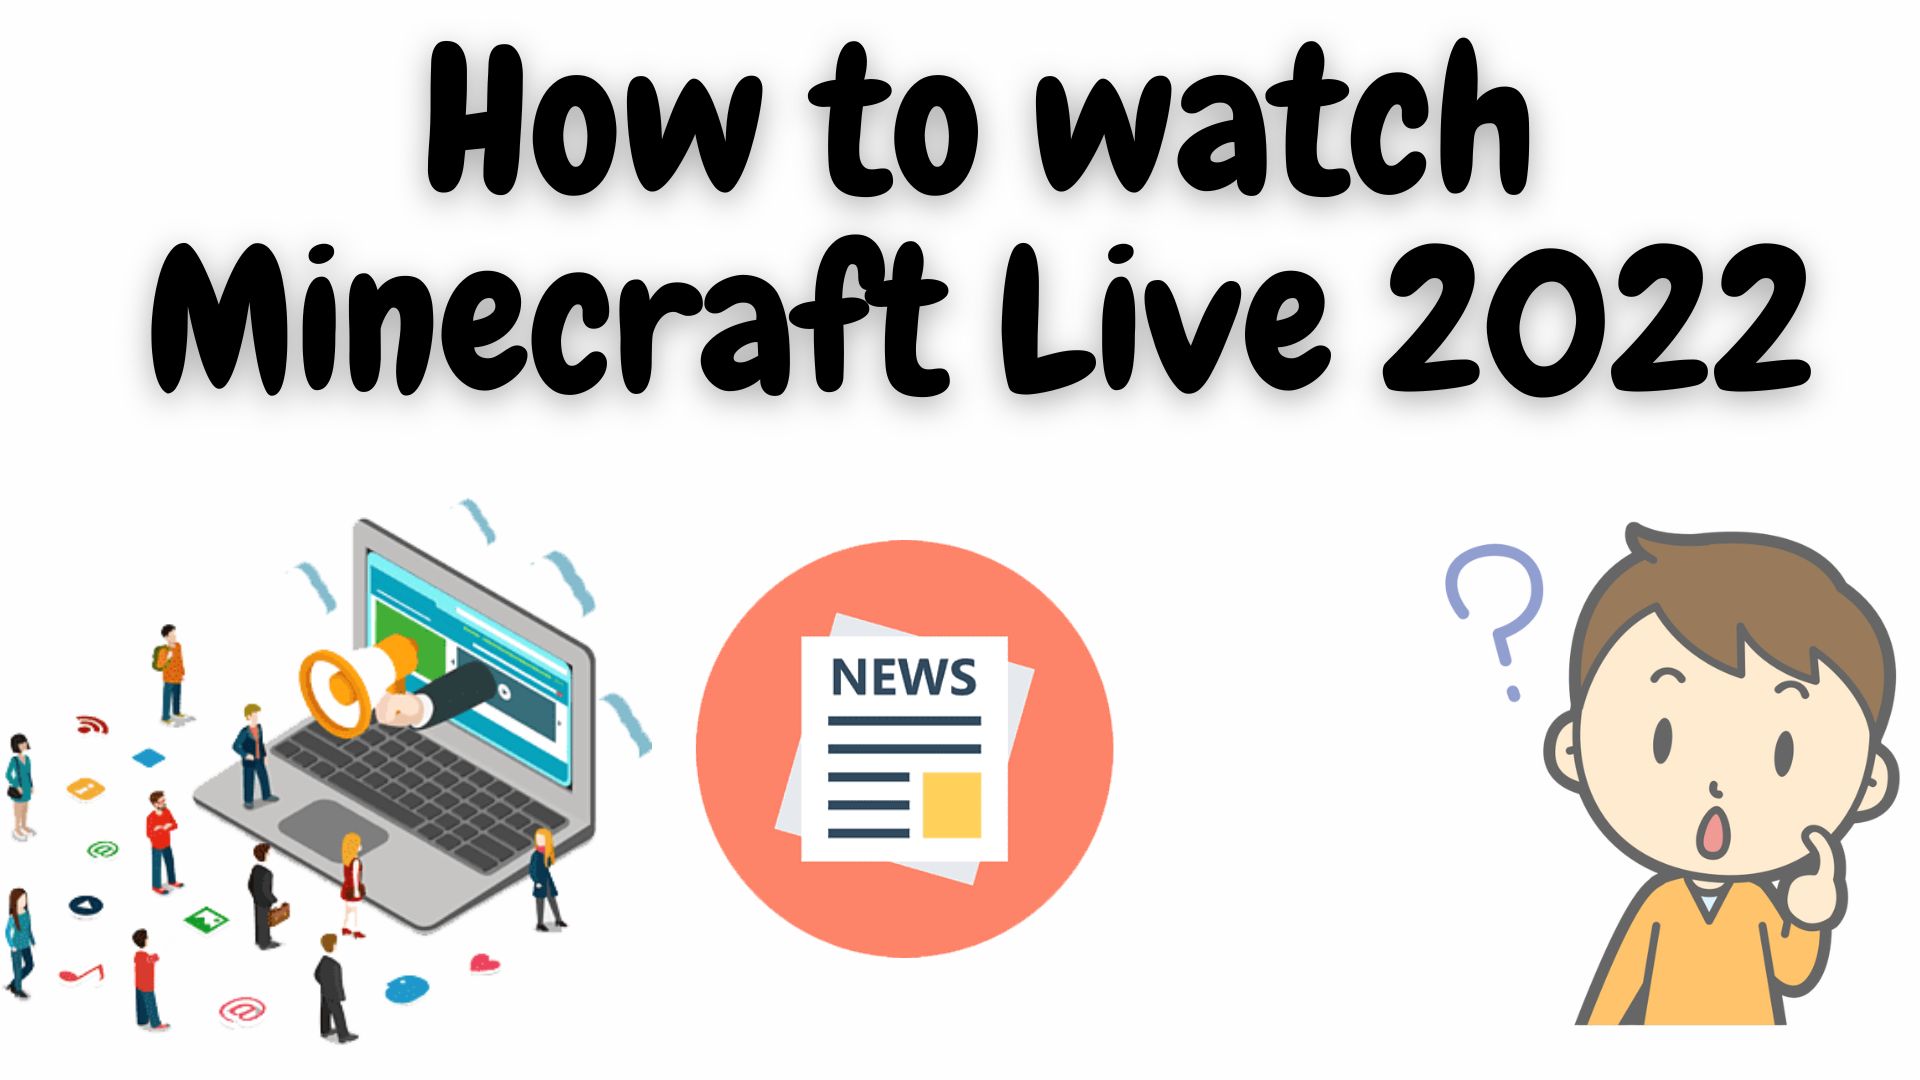 How To Watch Minecraft Live 2022